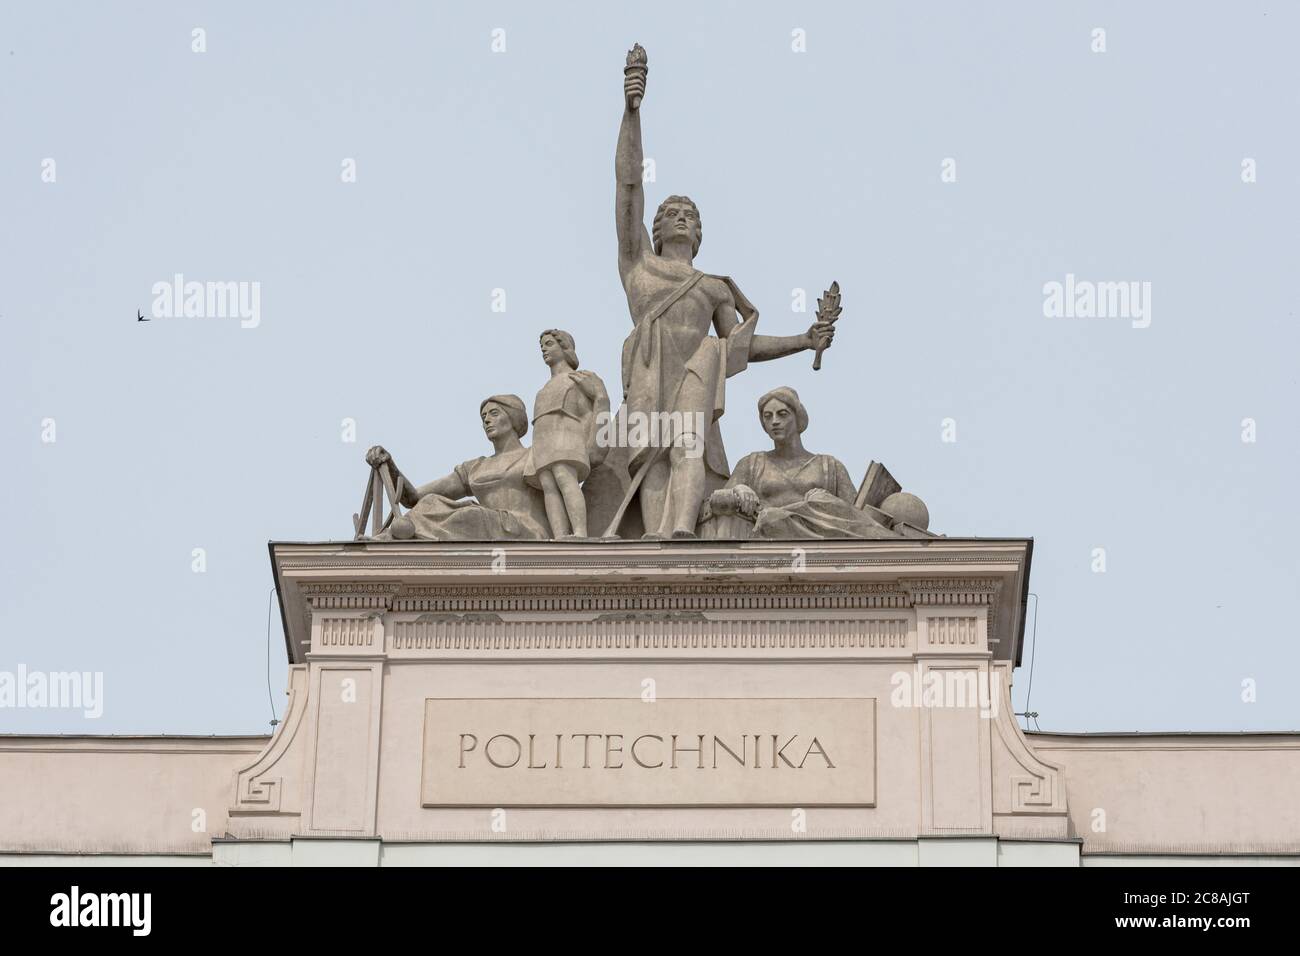 Warsaw, Poland - May 22, 2020: Close-up of the sculpture on the main building of the Warsaw University of Technology. Stock Photo